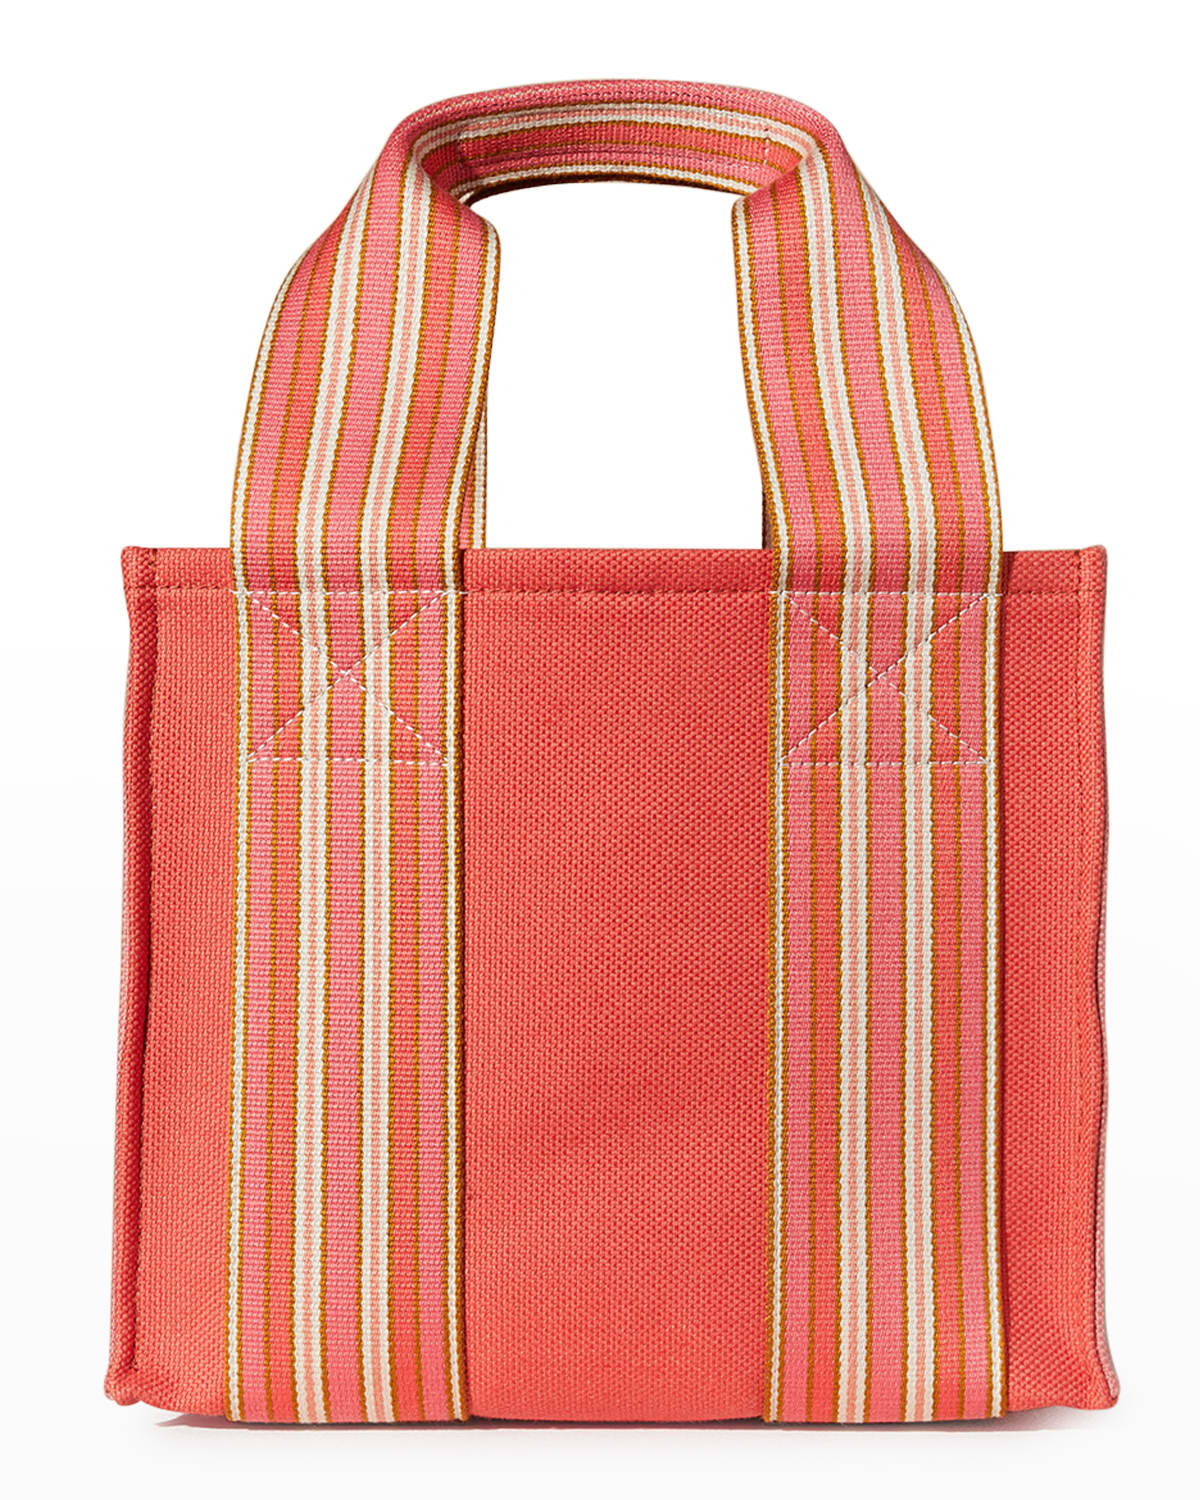 Loro Piana The Suitcase Striped Canvas Tote Bag In Red